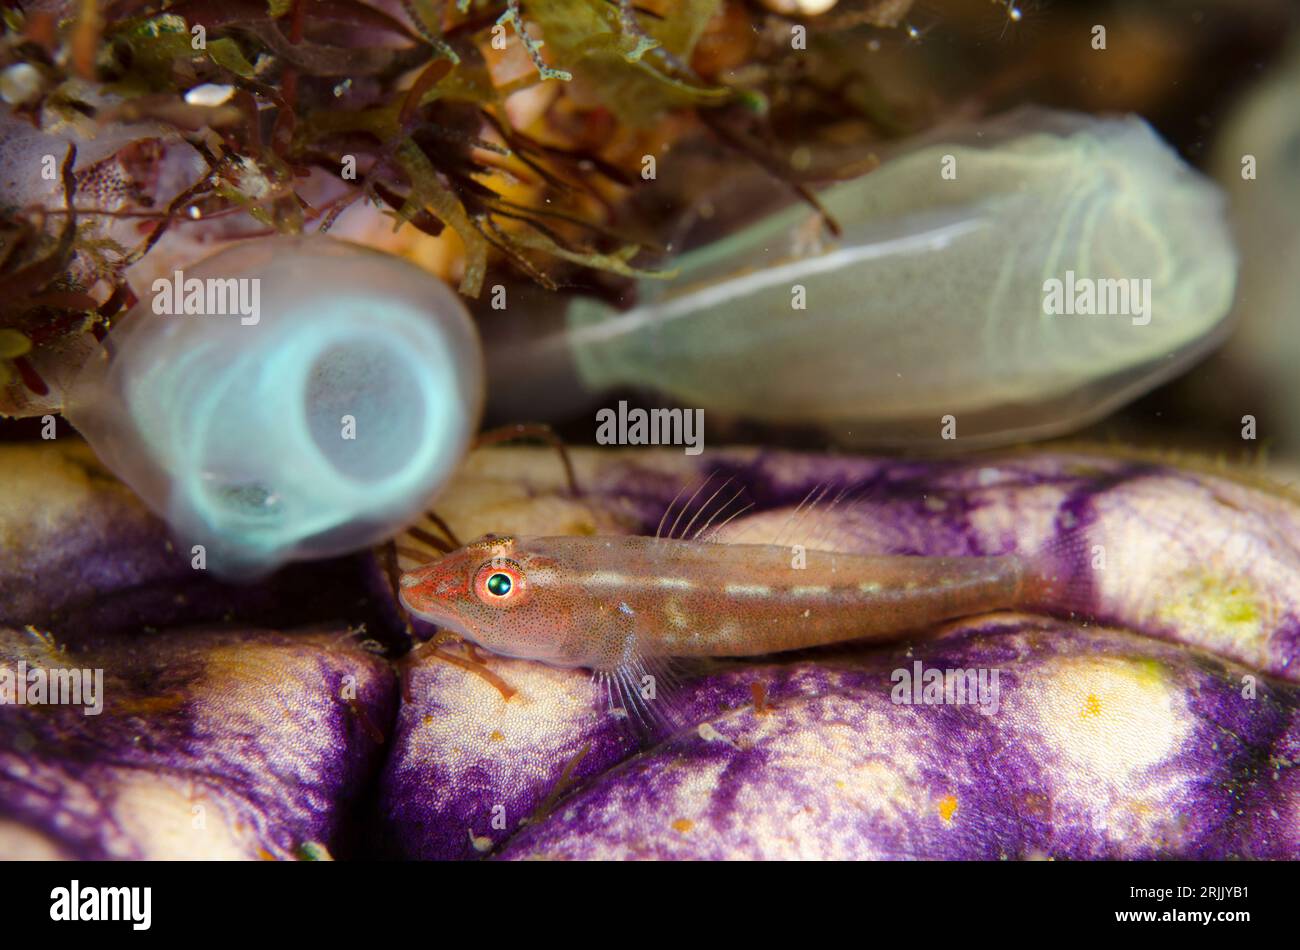 Common Ghost Goby, Pleurosicya mossambica, on Golden Sea Squirt, Polycarpa aurata, with Sea Squirt, Rhopalaea sp, in background, night dive, TK1 dive Stock Photo